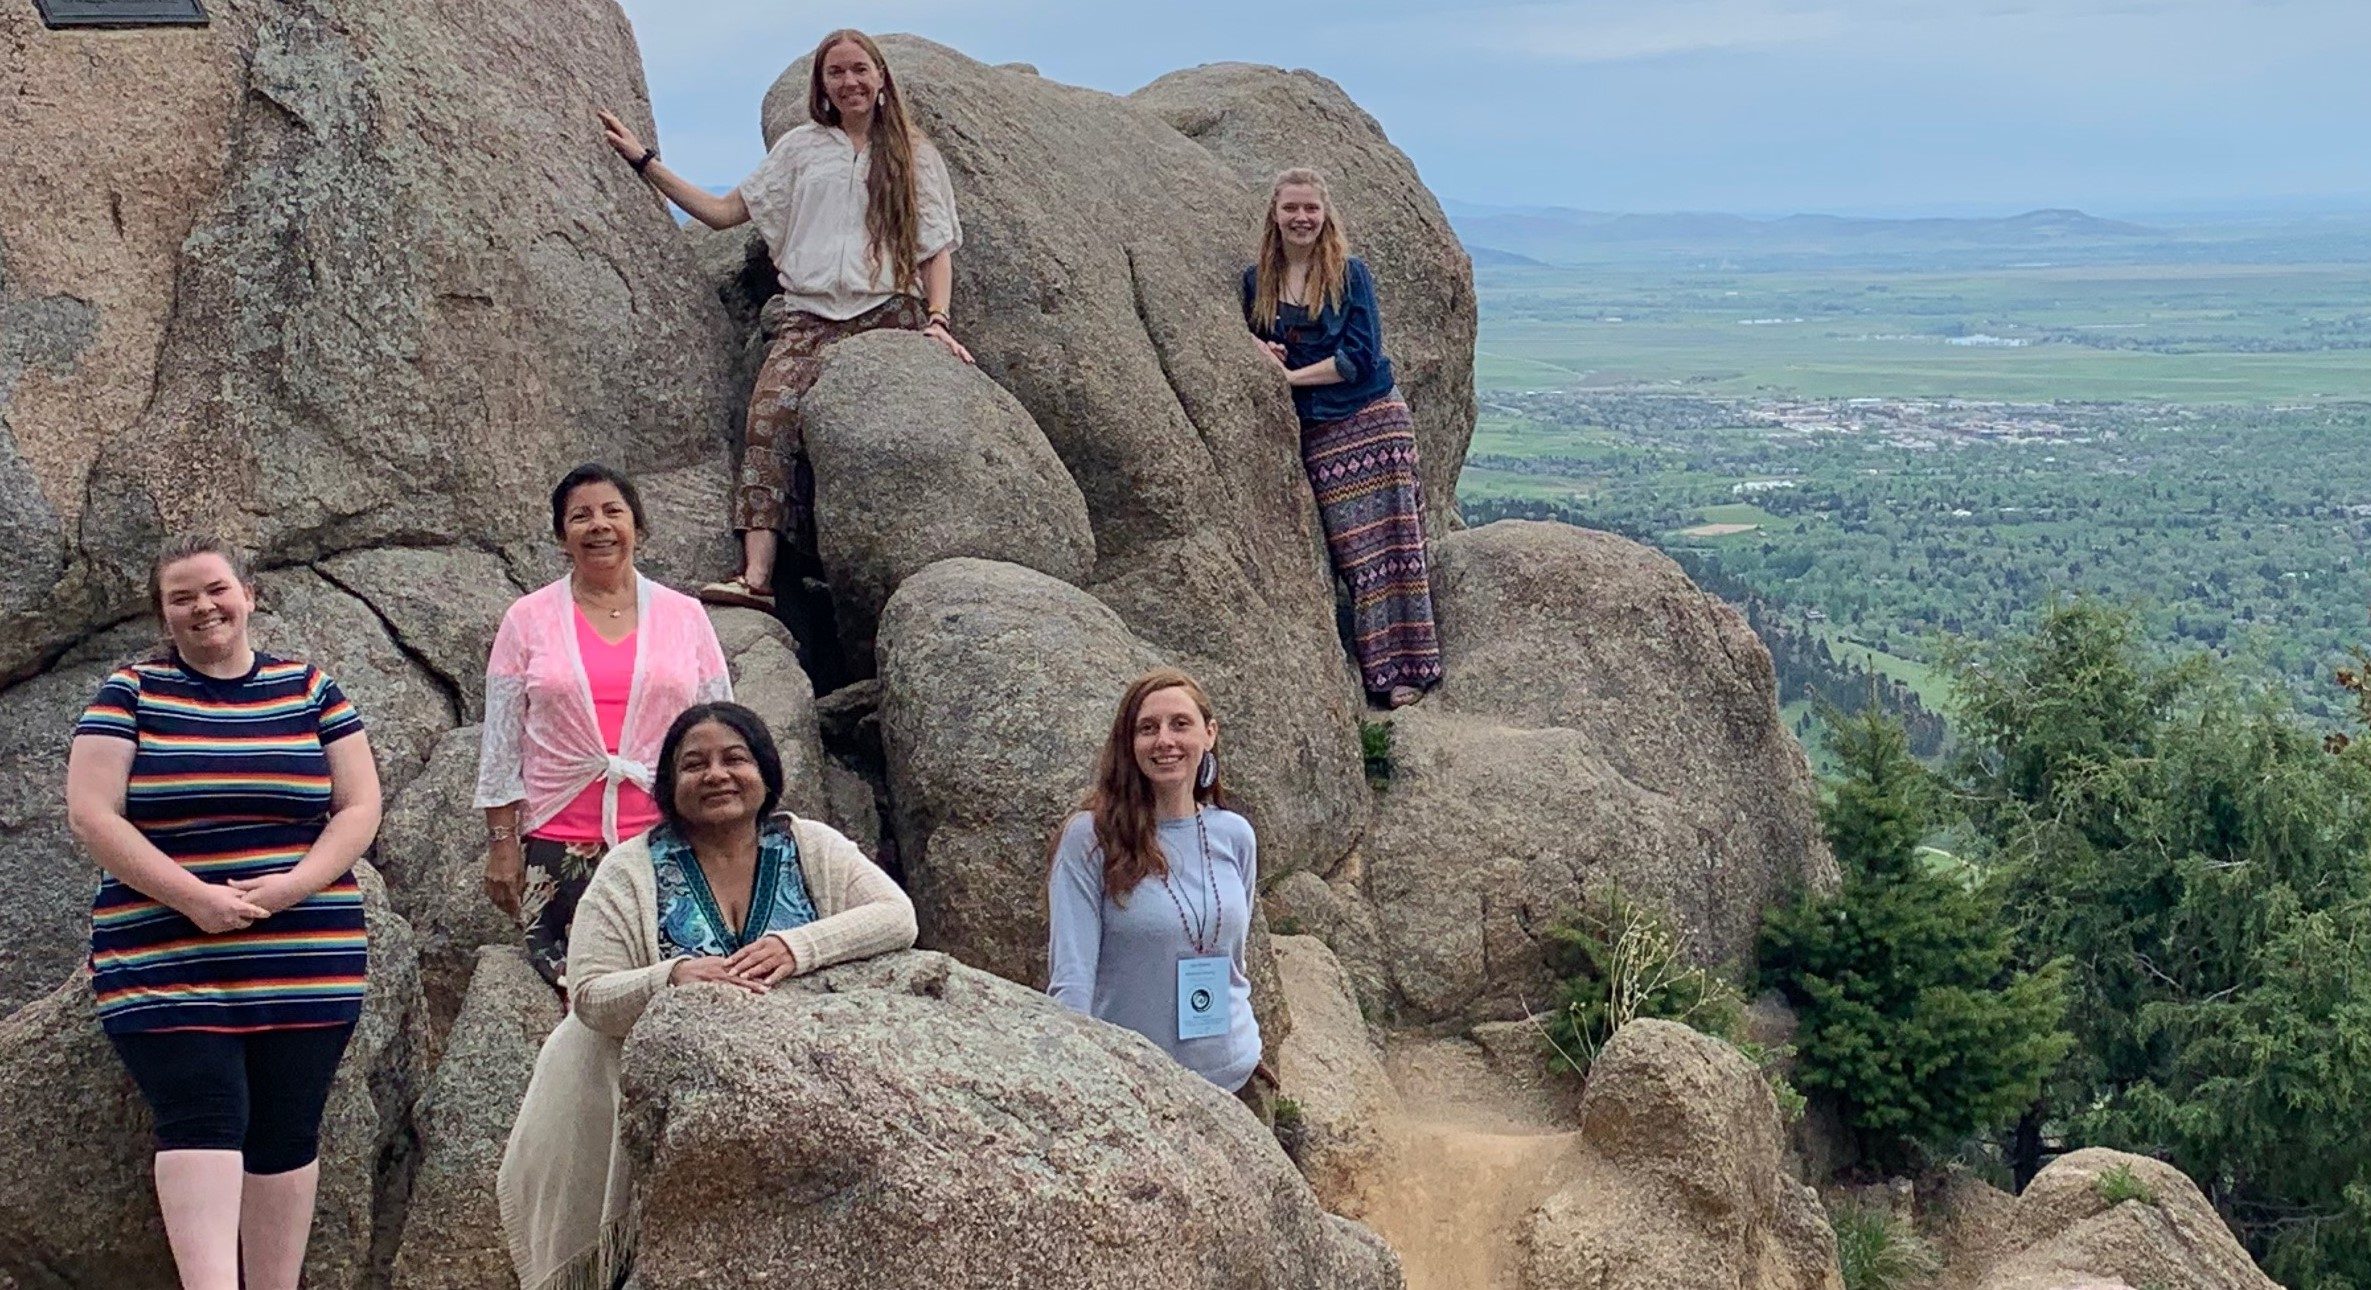 Michell Holbeck (’20, left) and Anna Haynes (’20, right, on rock), Niizhoo-gwayakochigewin communication and design interns joined Niizhoo collaborative members Dr. Vivian Delgado, Dr. Cornelia Santos, Erika Bailey-Johnson, and Kim Shelton at the Rising Voices workshop in Boulder, Colorado, in May of 2019.